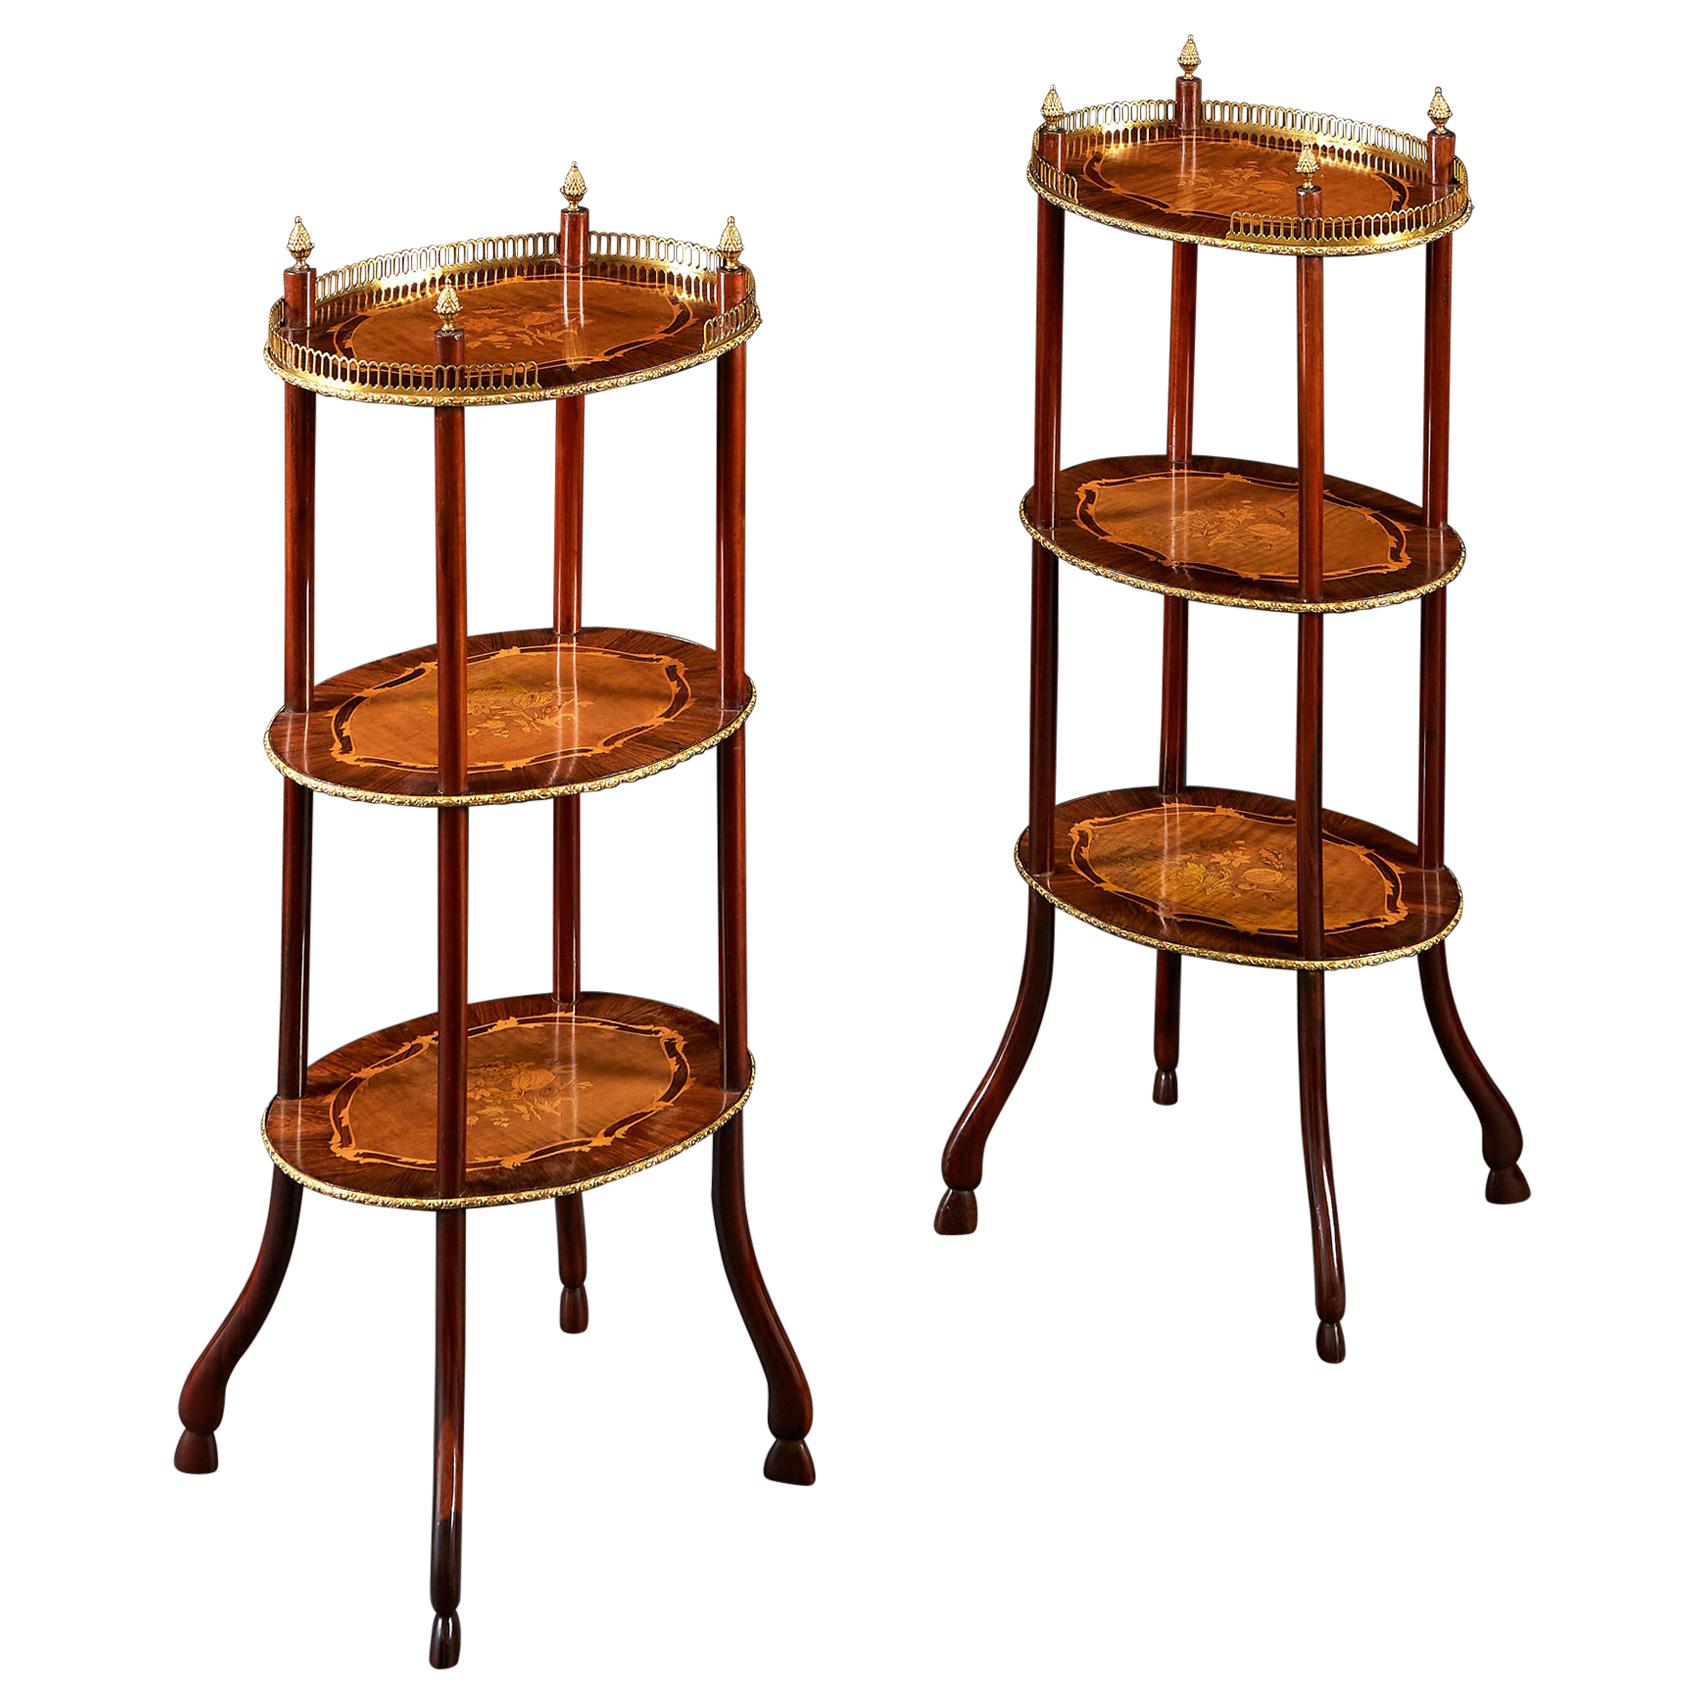 A Pair of 19th Century Three Tier Marquetry Etageres with Brass Galleries